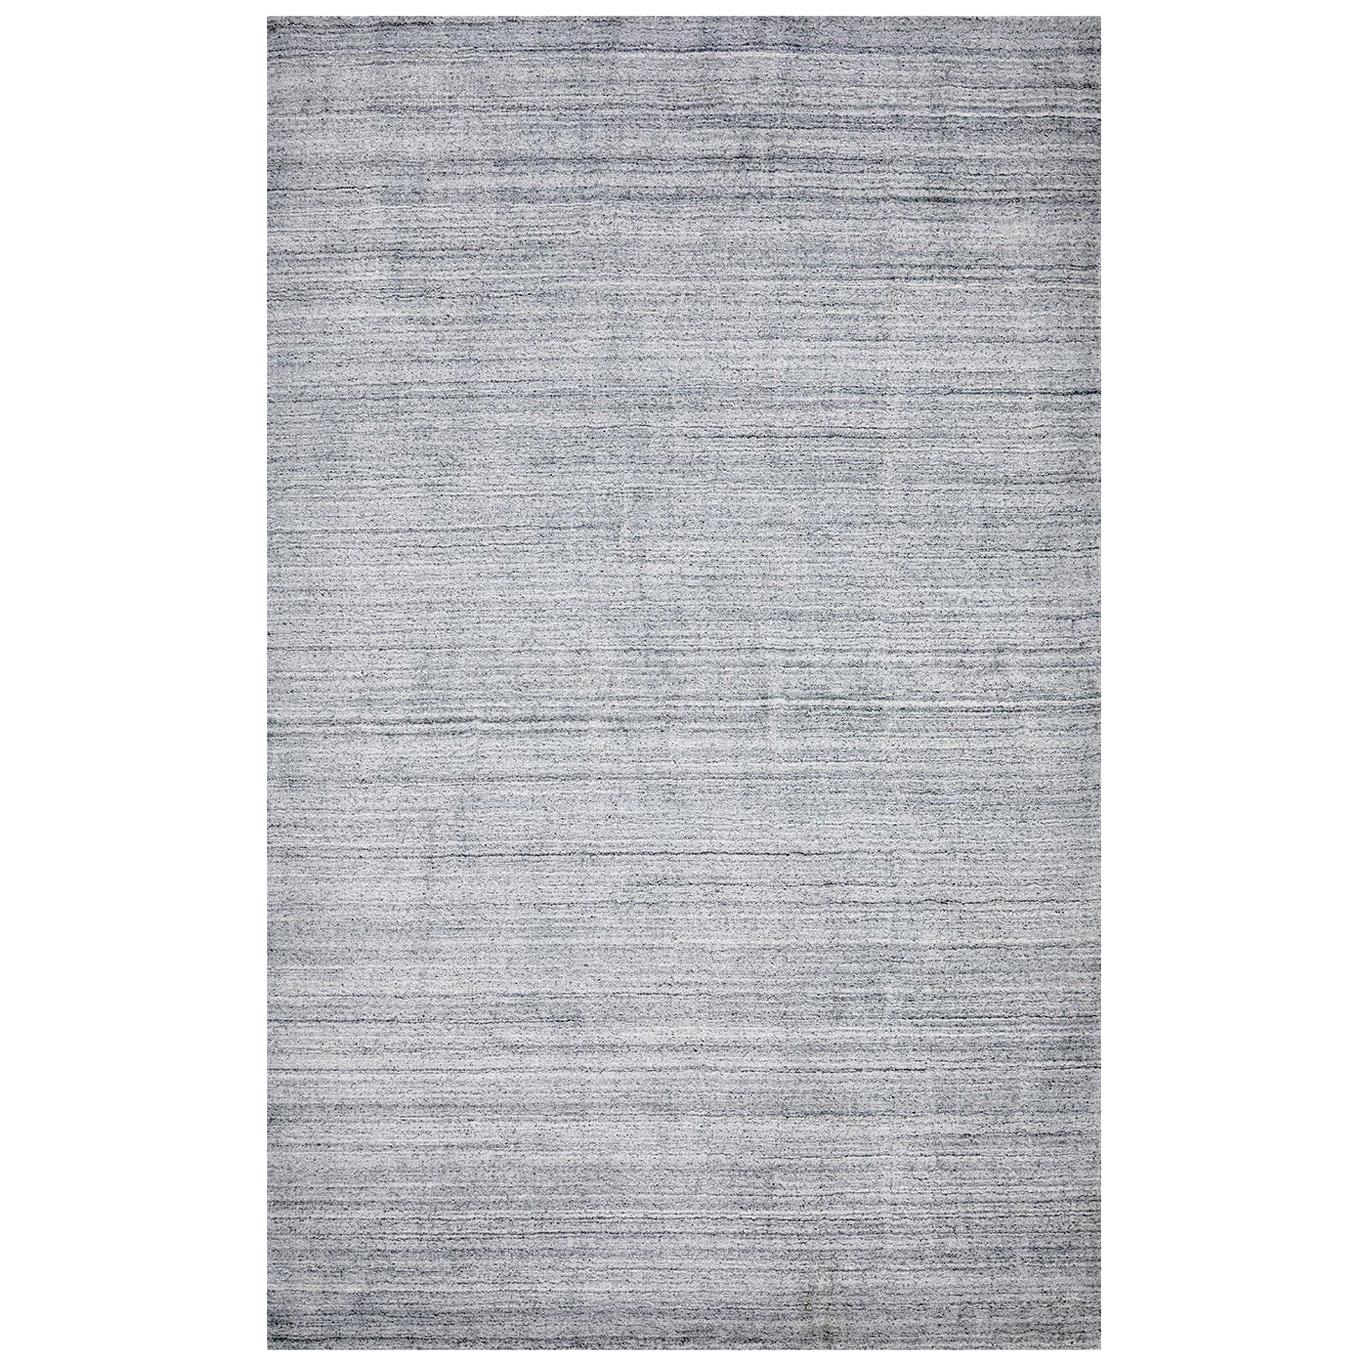 Indian Made Handmade Contemporary Solid Area Rug For Sale